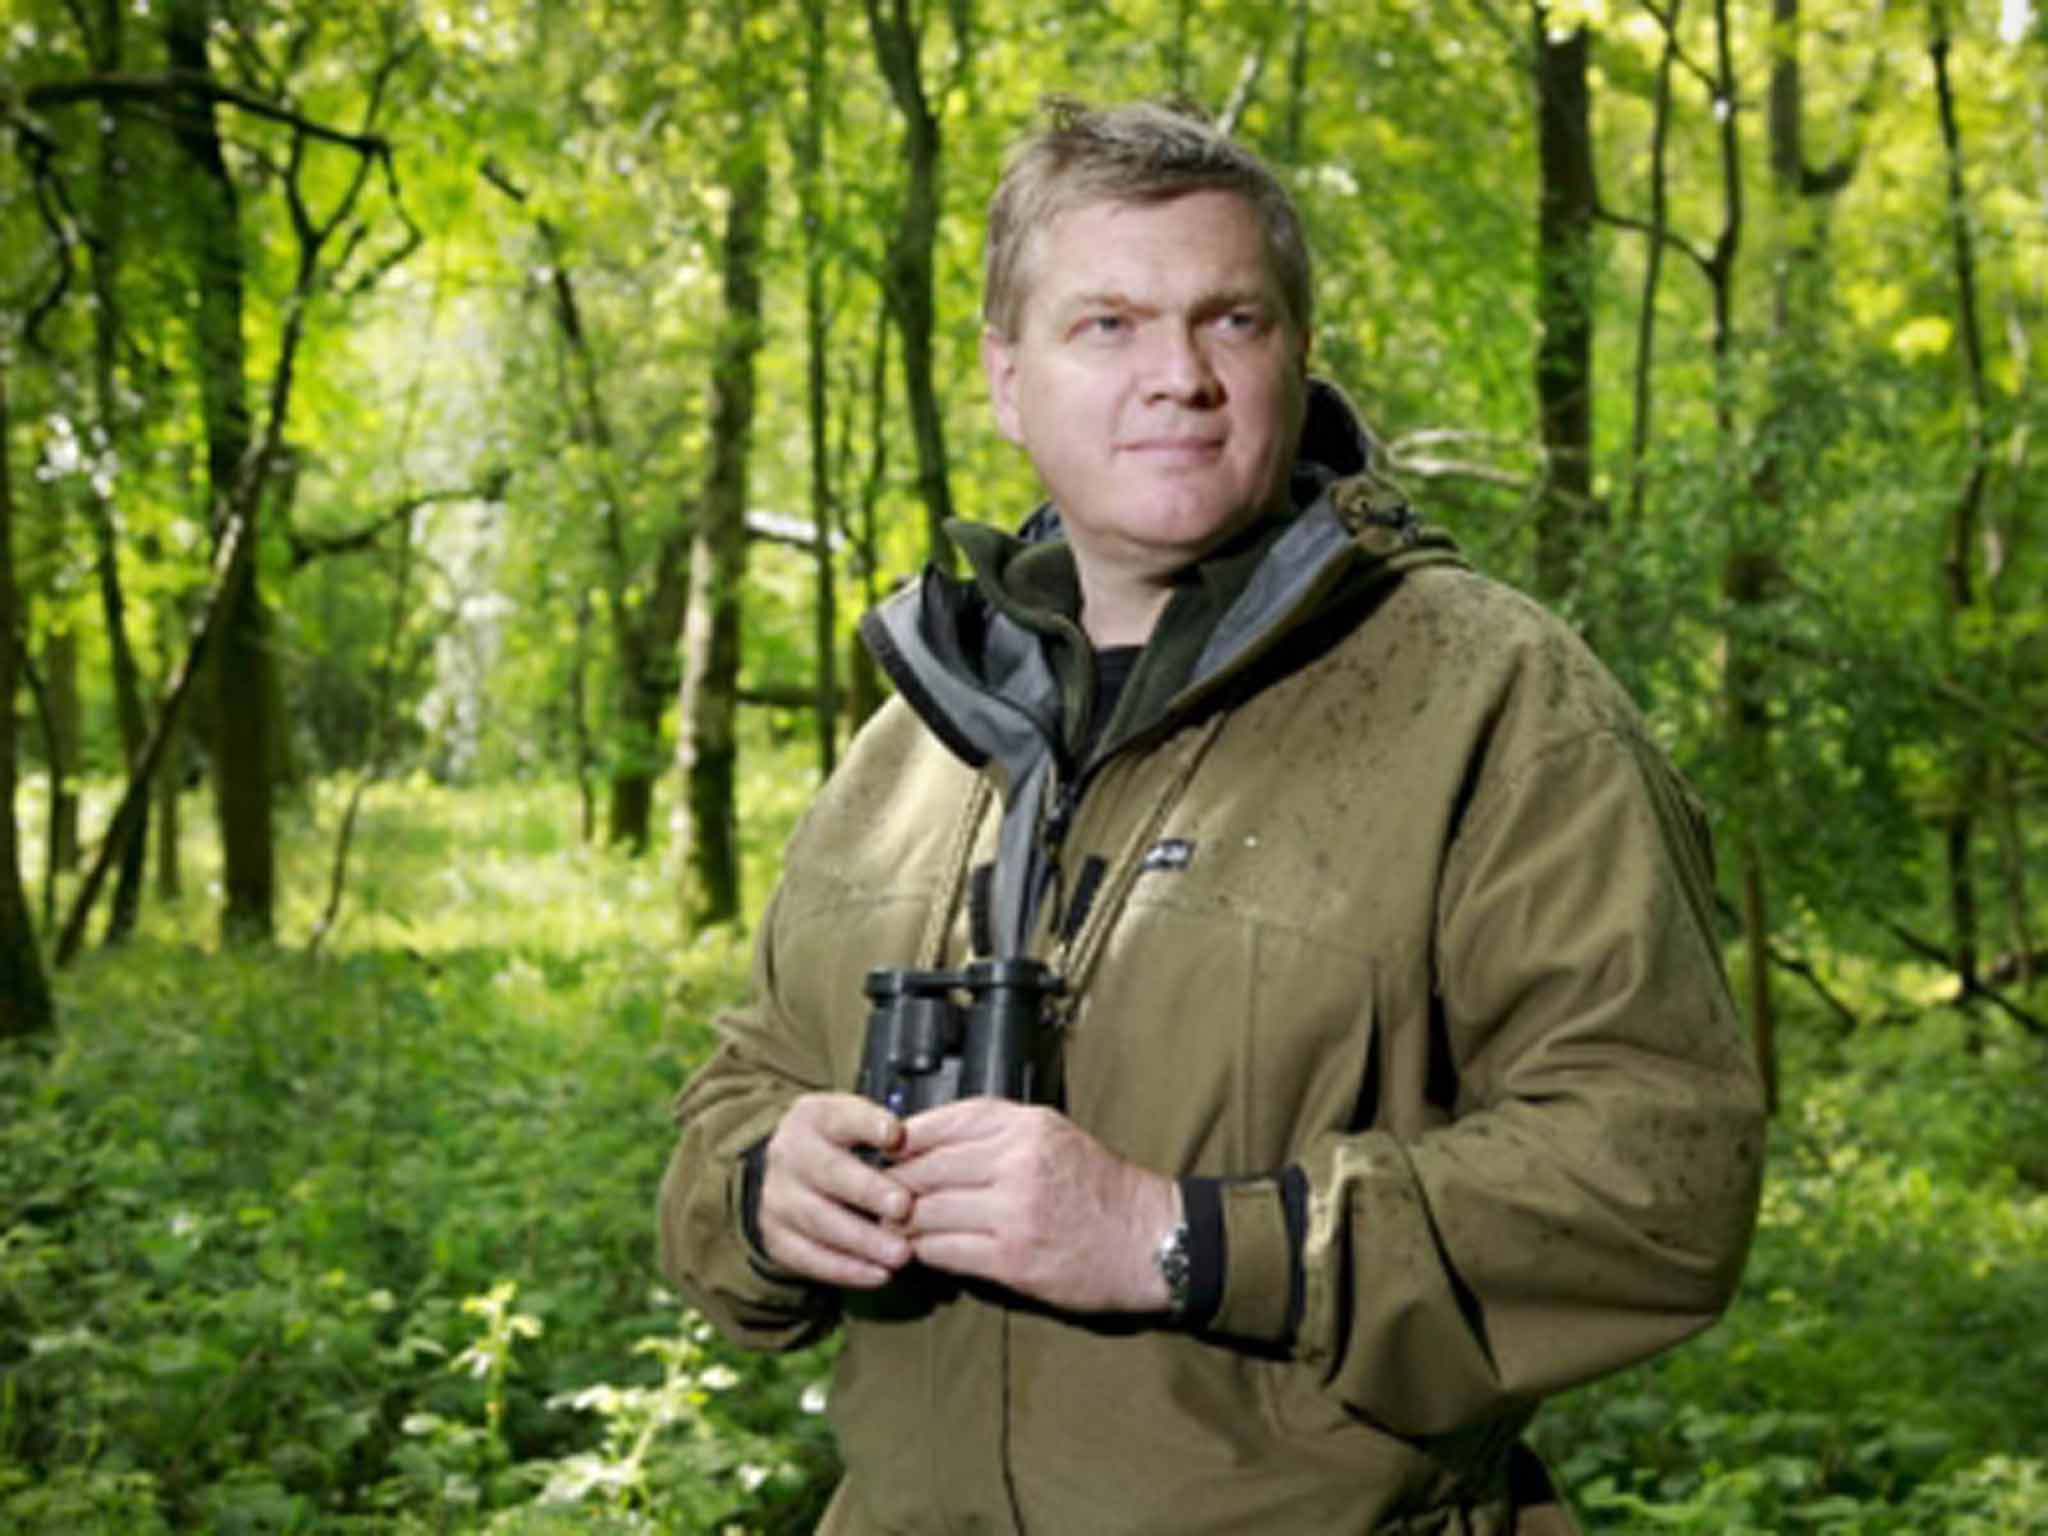 Wilderness Walks with Ray Mears, ITV